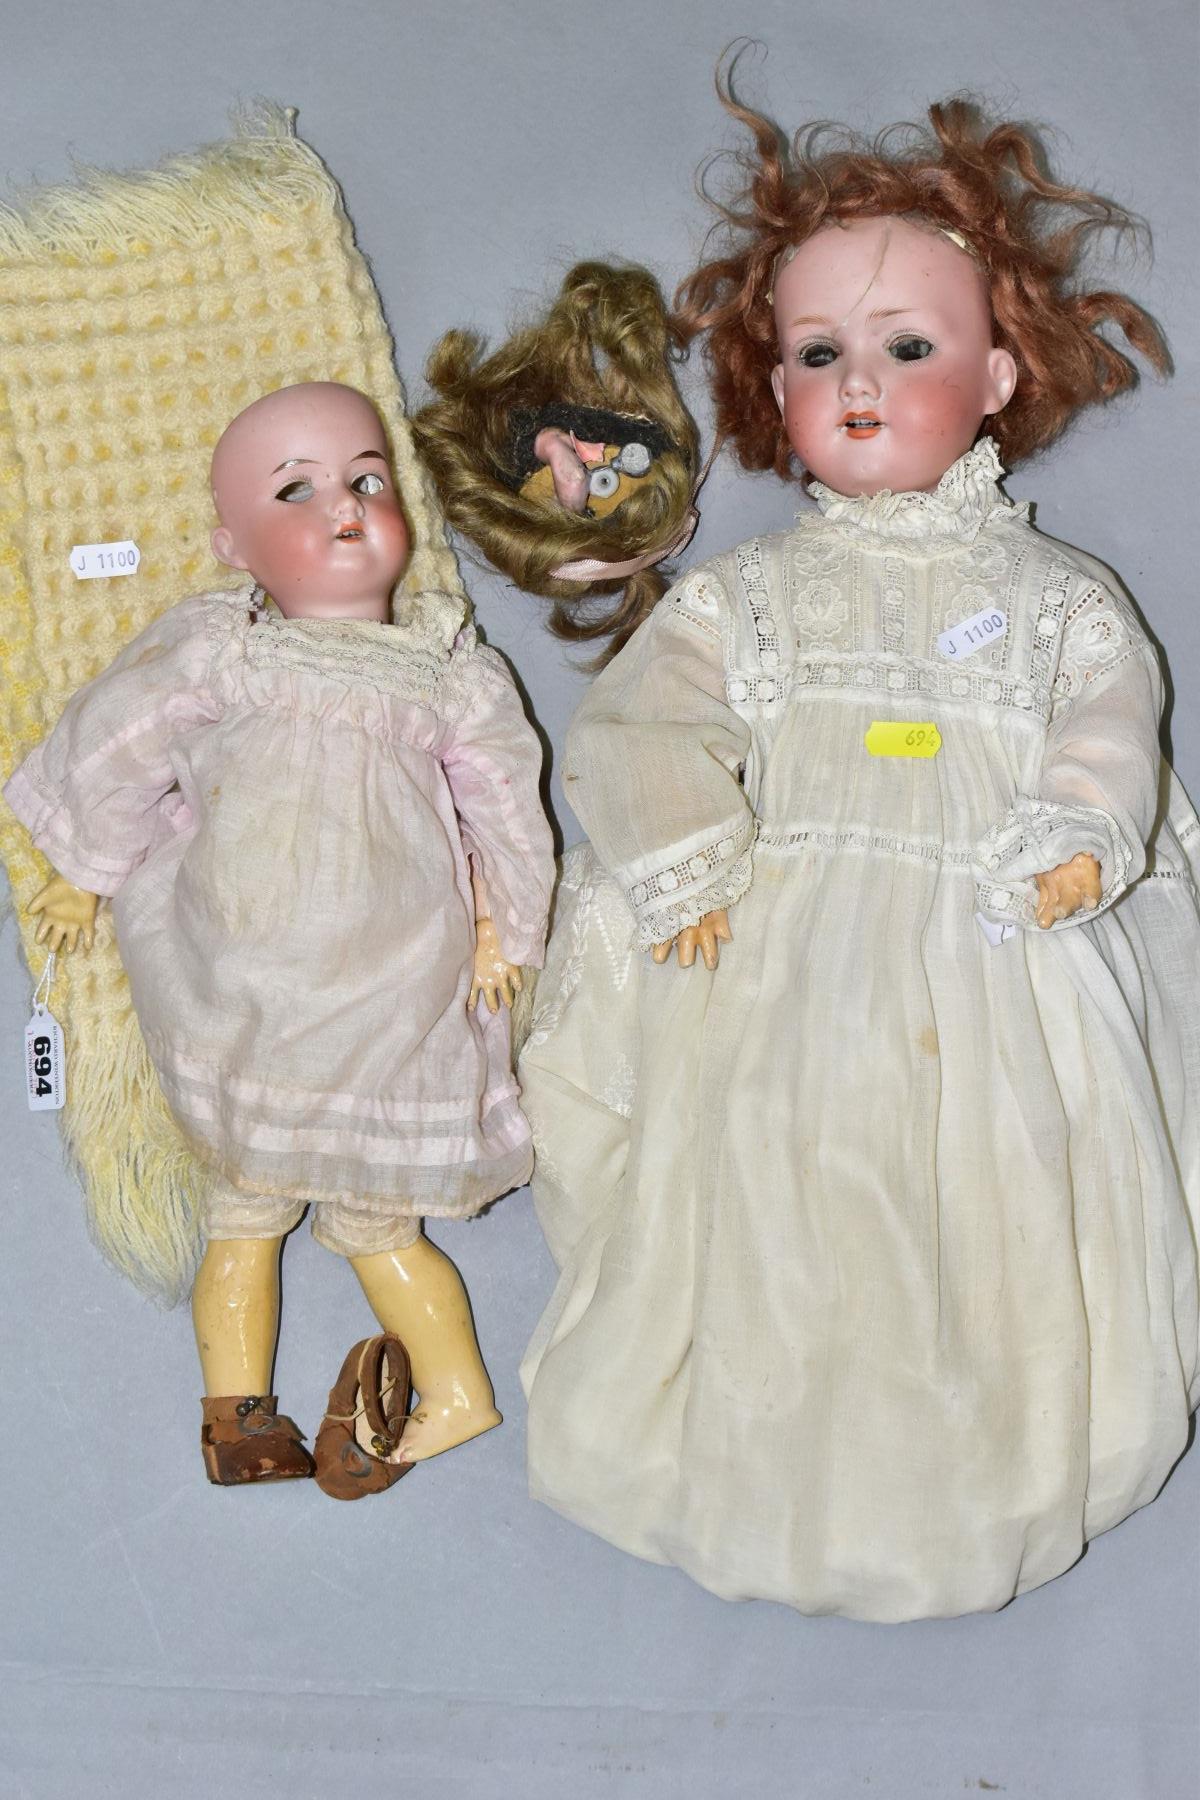 TWO ARMAND MARSEILLE BISQUE HEAD DOLLS, larger one has nape of neck marked 'Armand Marseille,